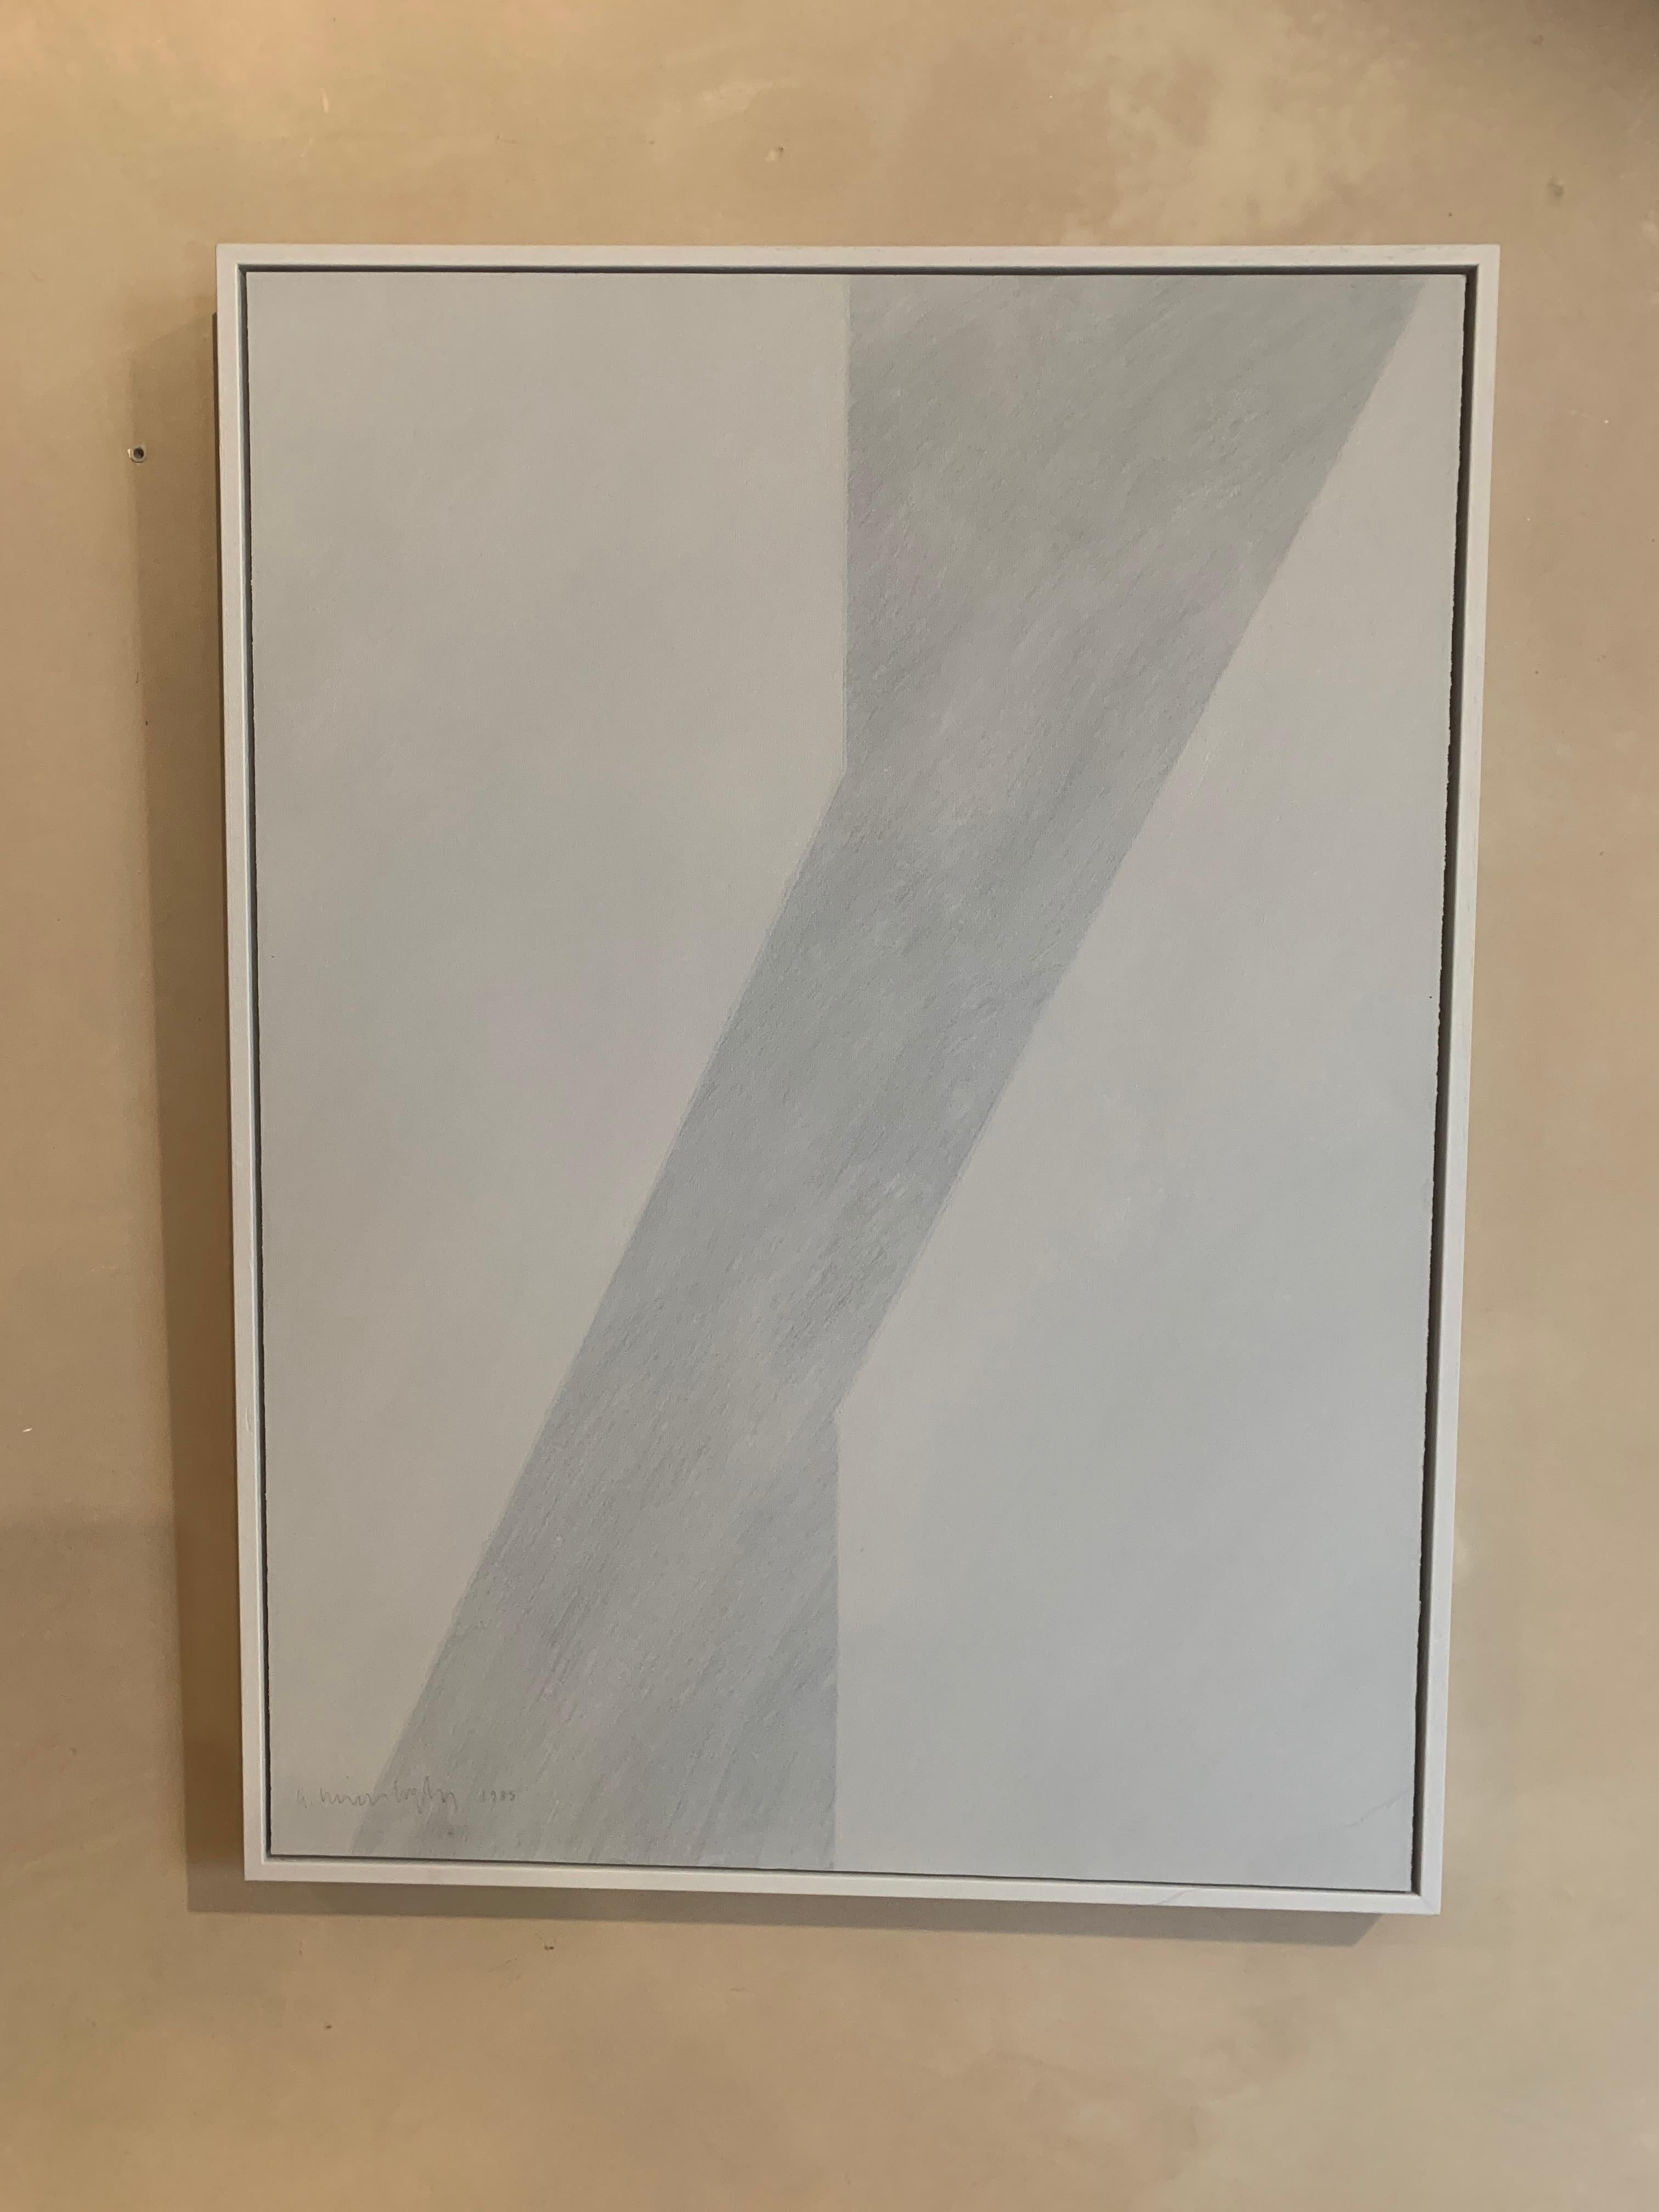 Paint Gilbert Swimberghe Oil on Canvas 'Grey' For Sale